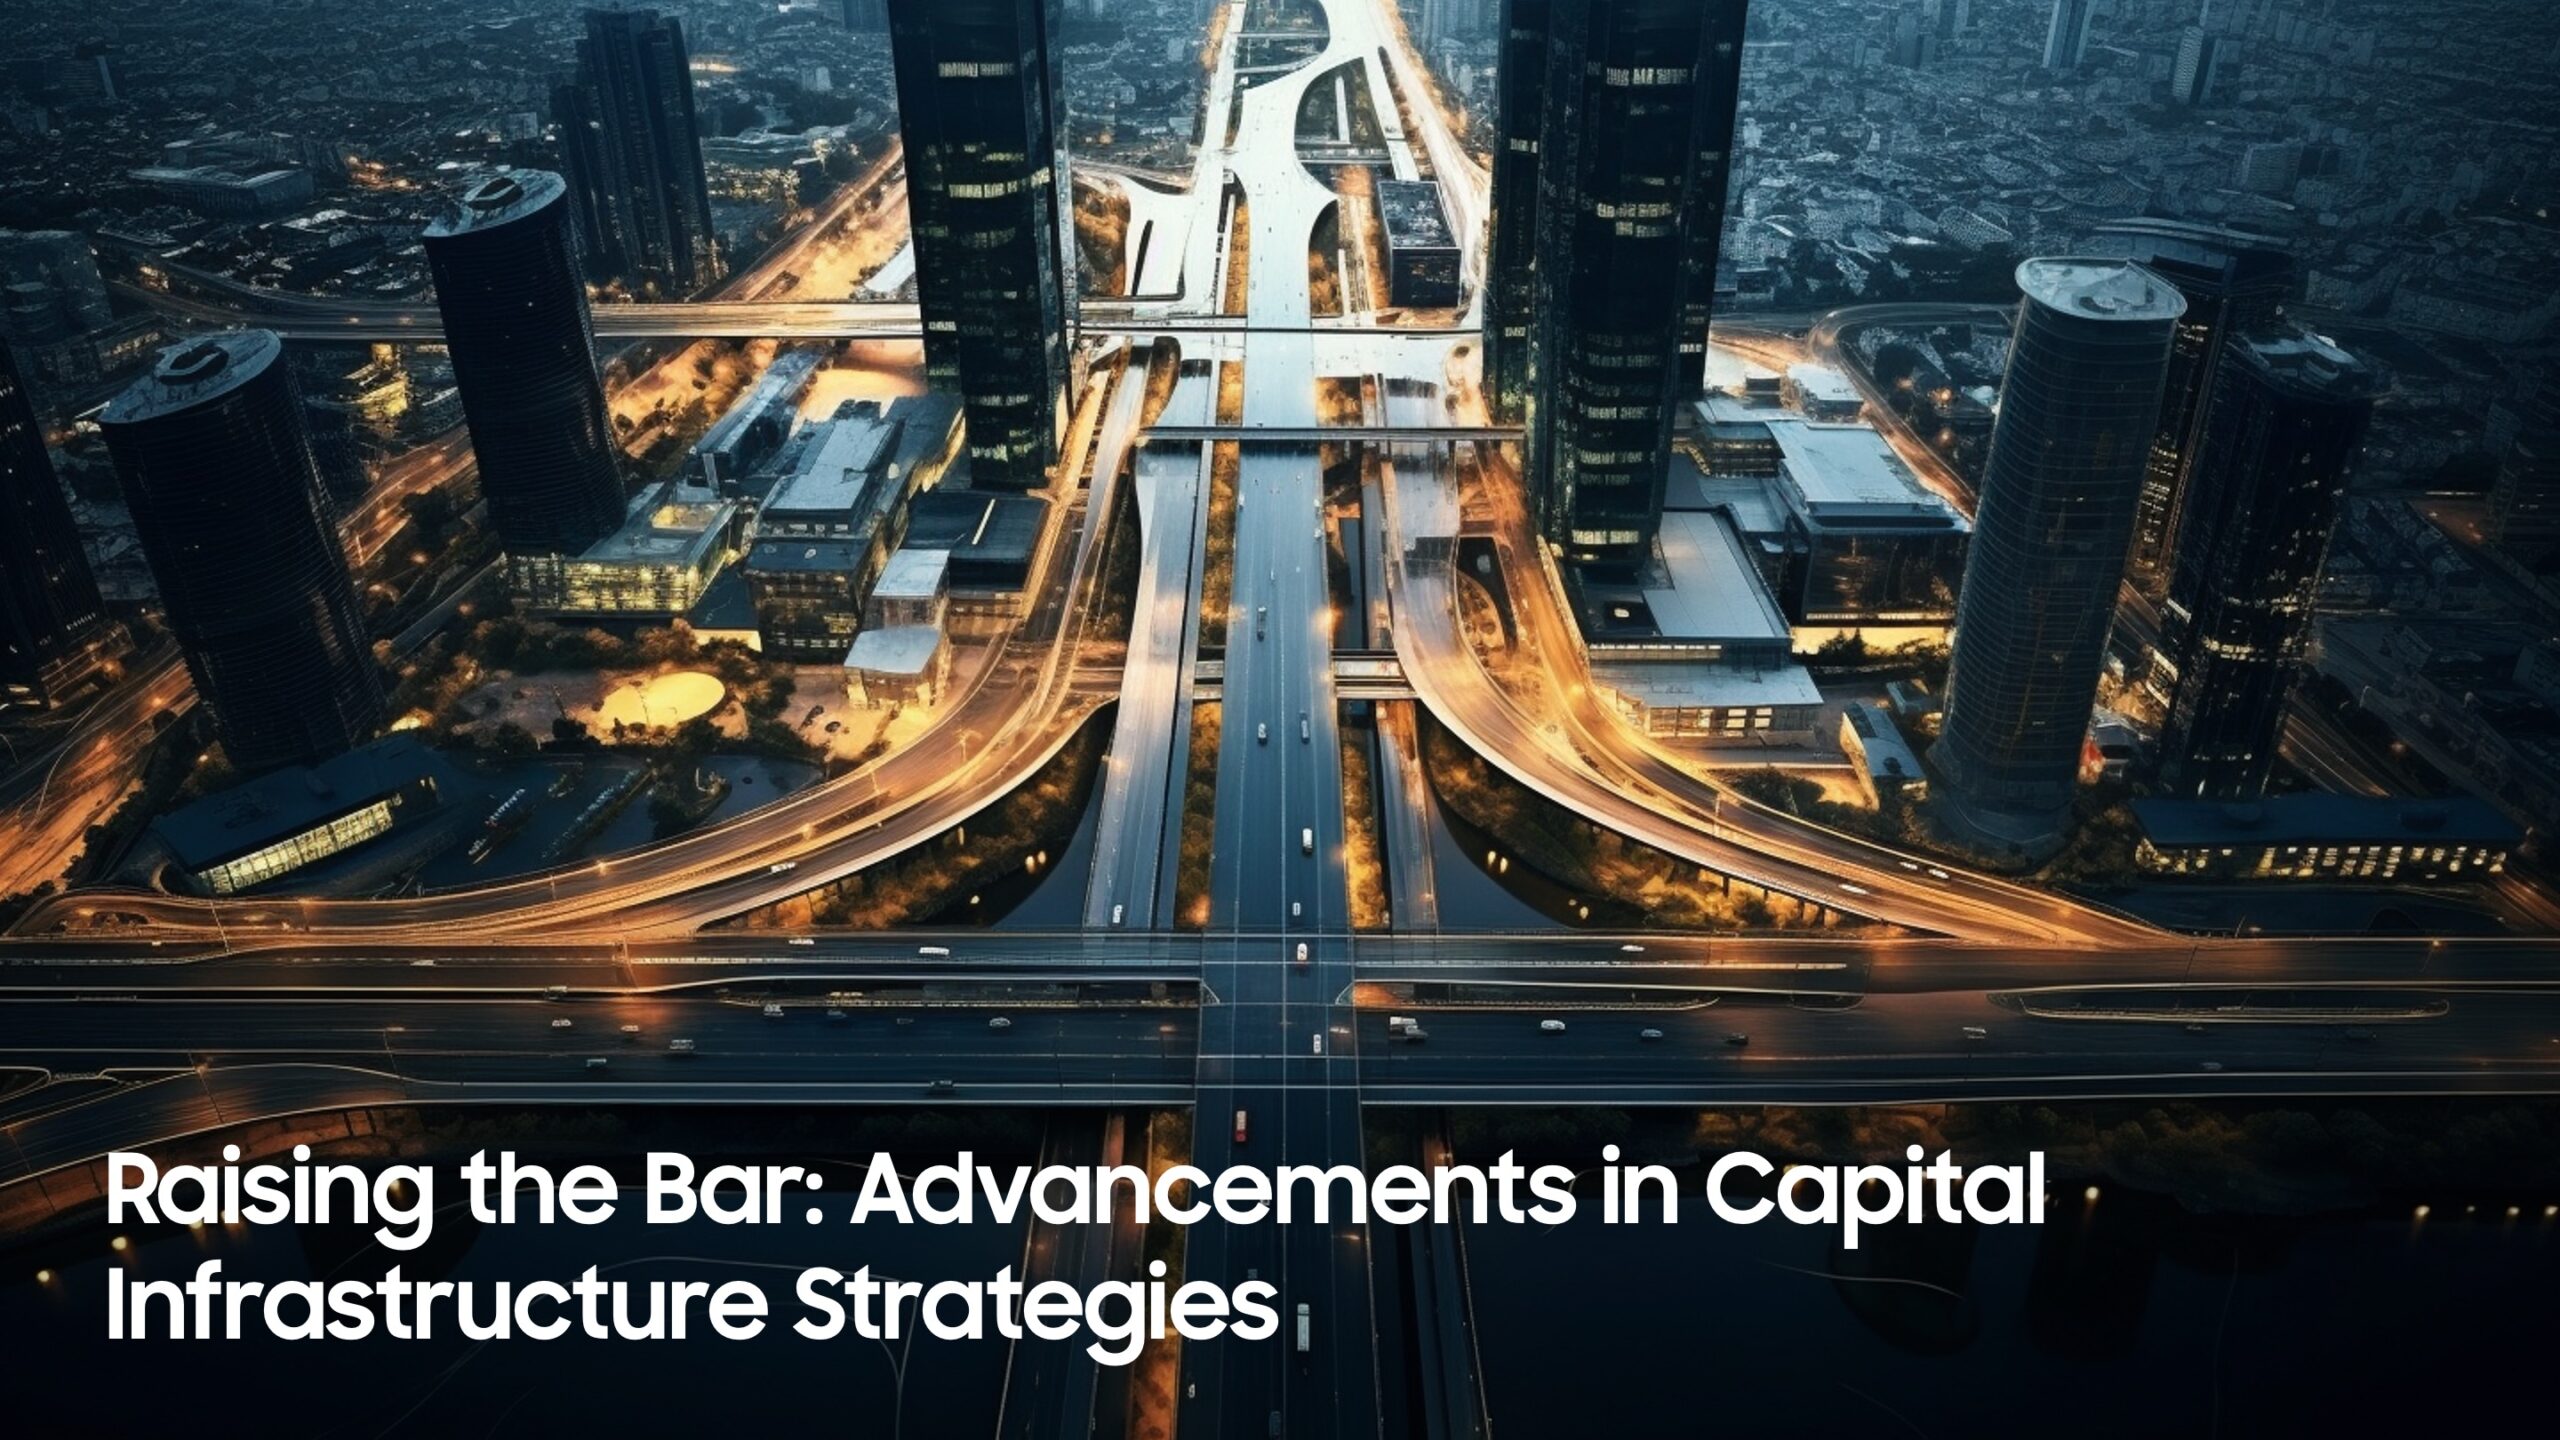 Raising the Bar: Advancements in Capital Infrastructure Strategies